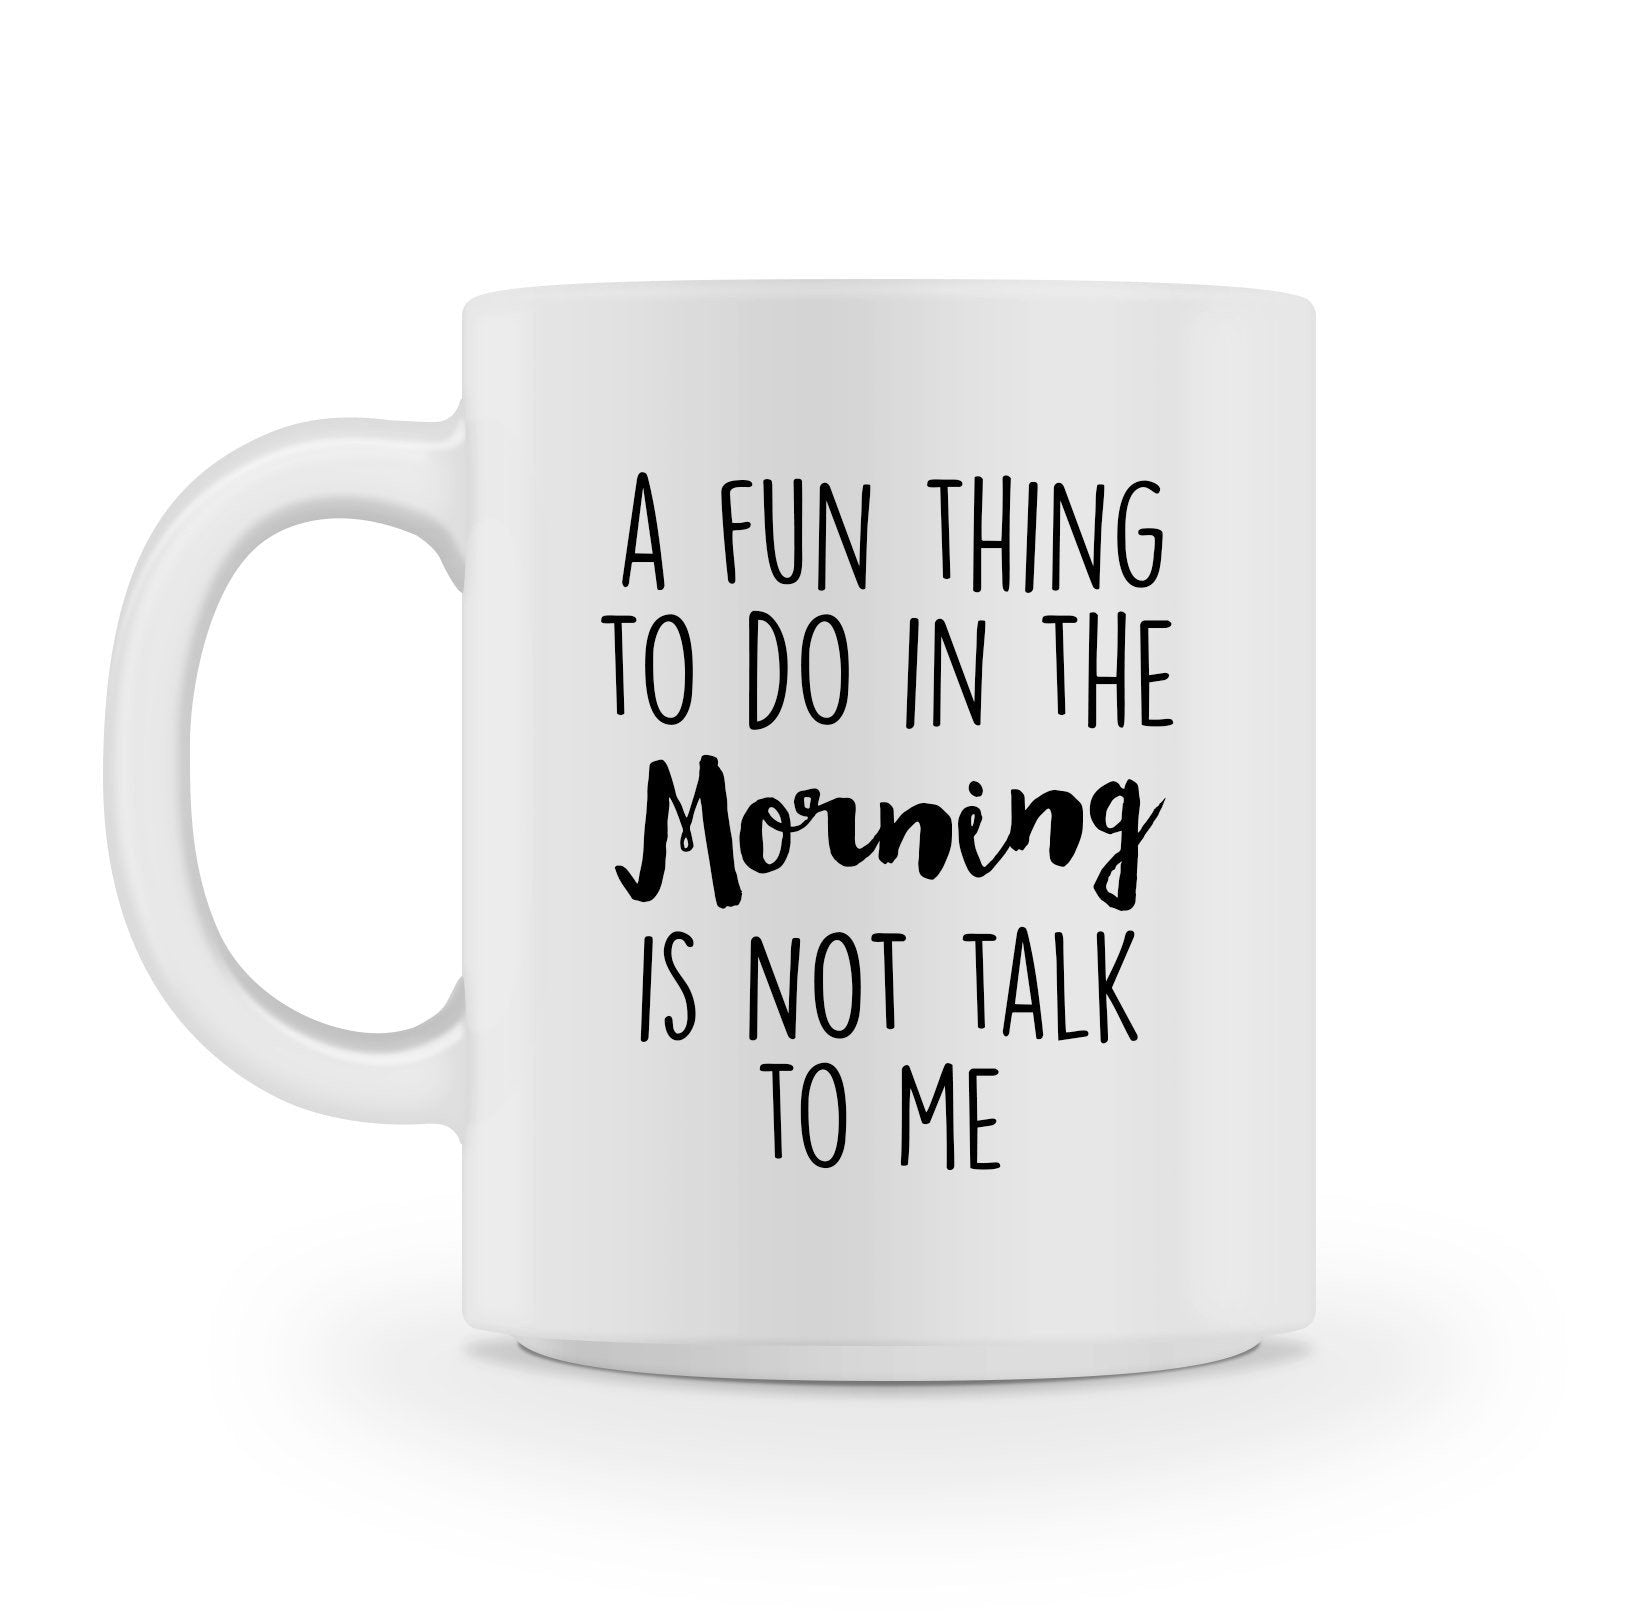 A fun thing to do in the morning is not talk to me MUG